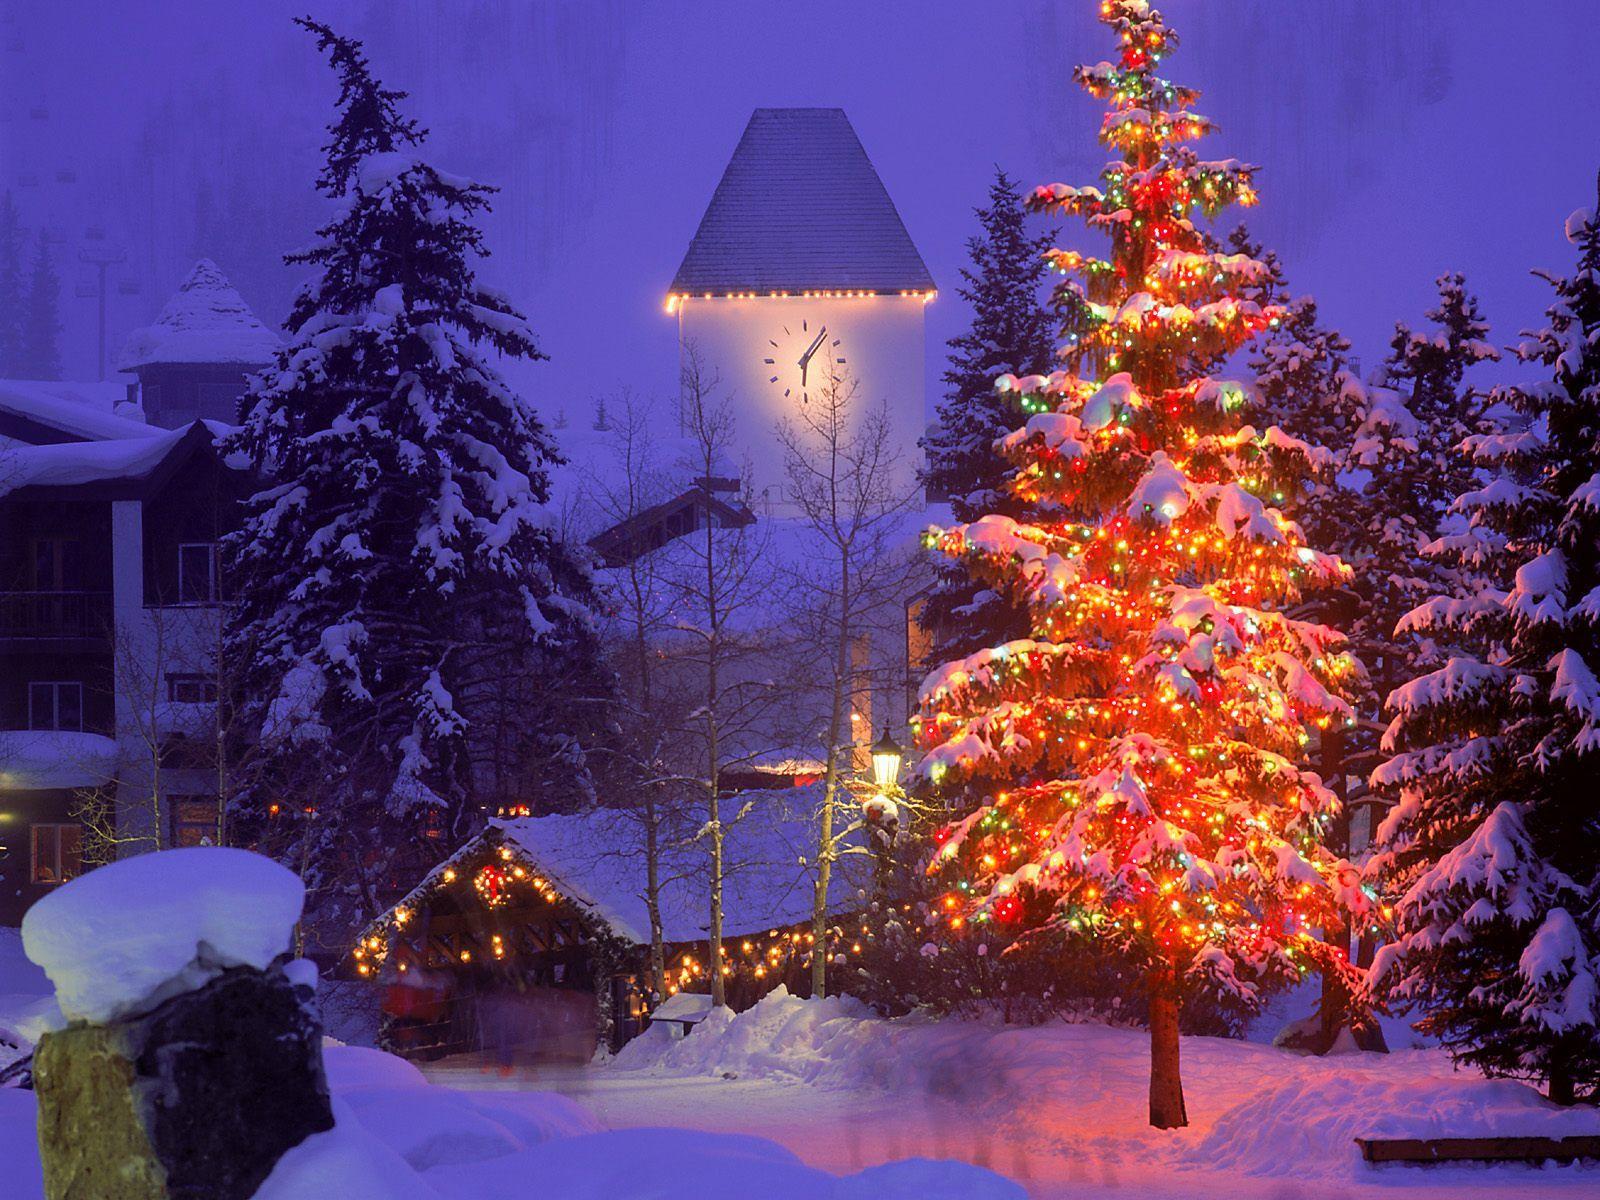 Christmas Village Wallpapers - Top Free Christmas Village Backgrounds ...